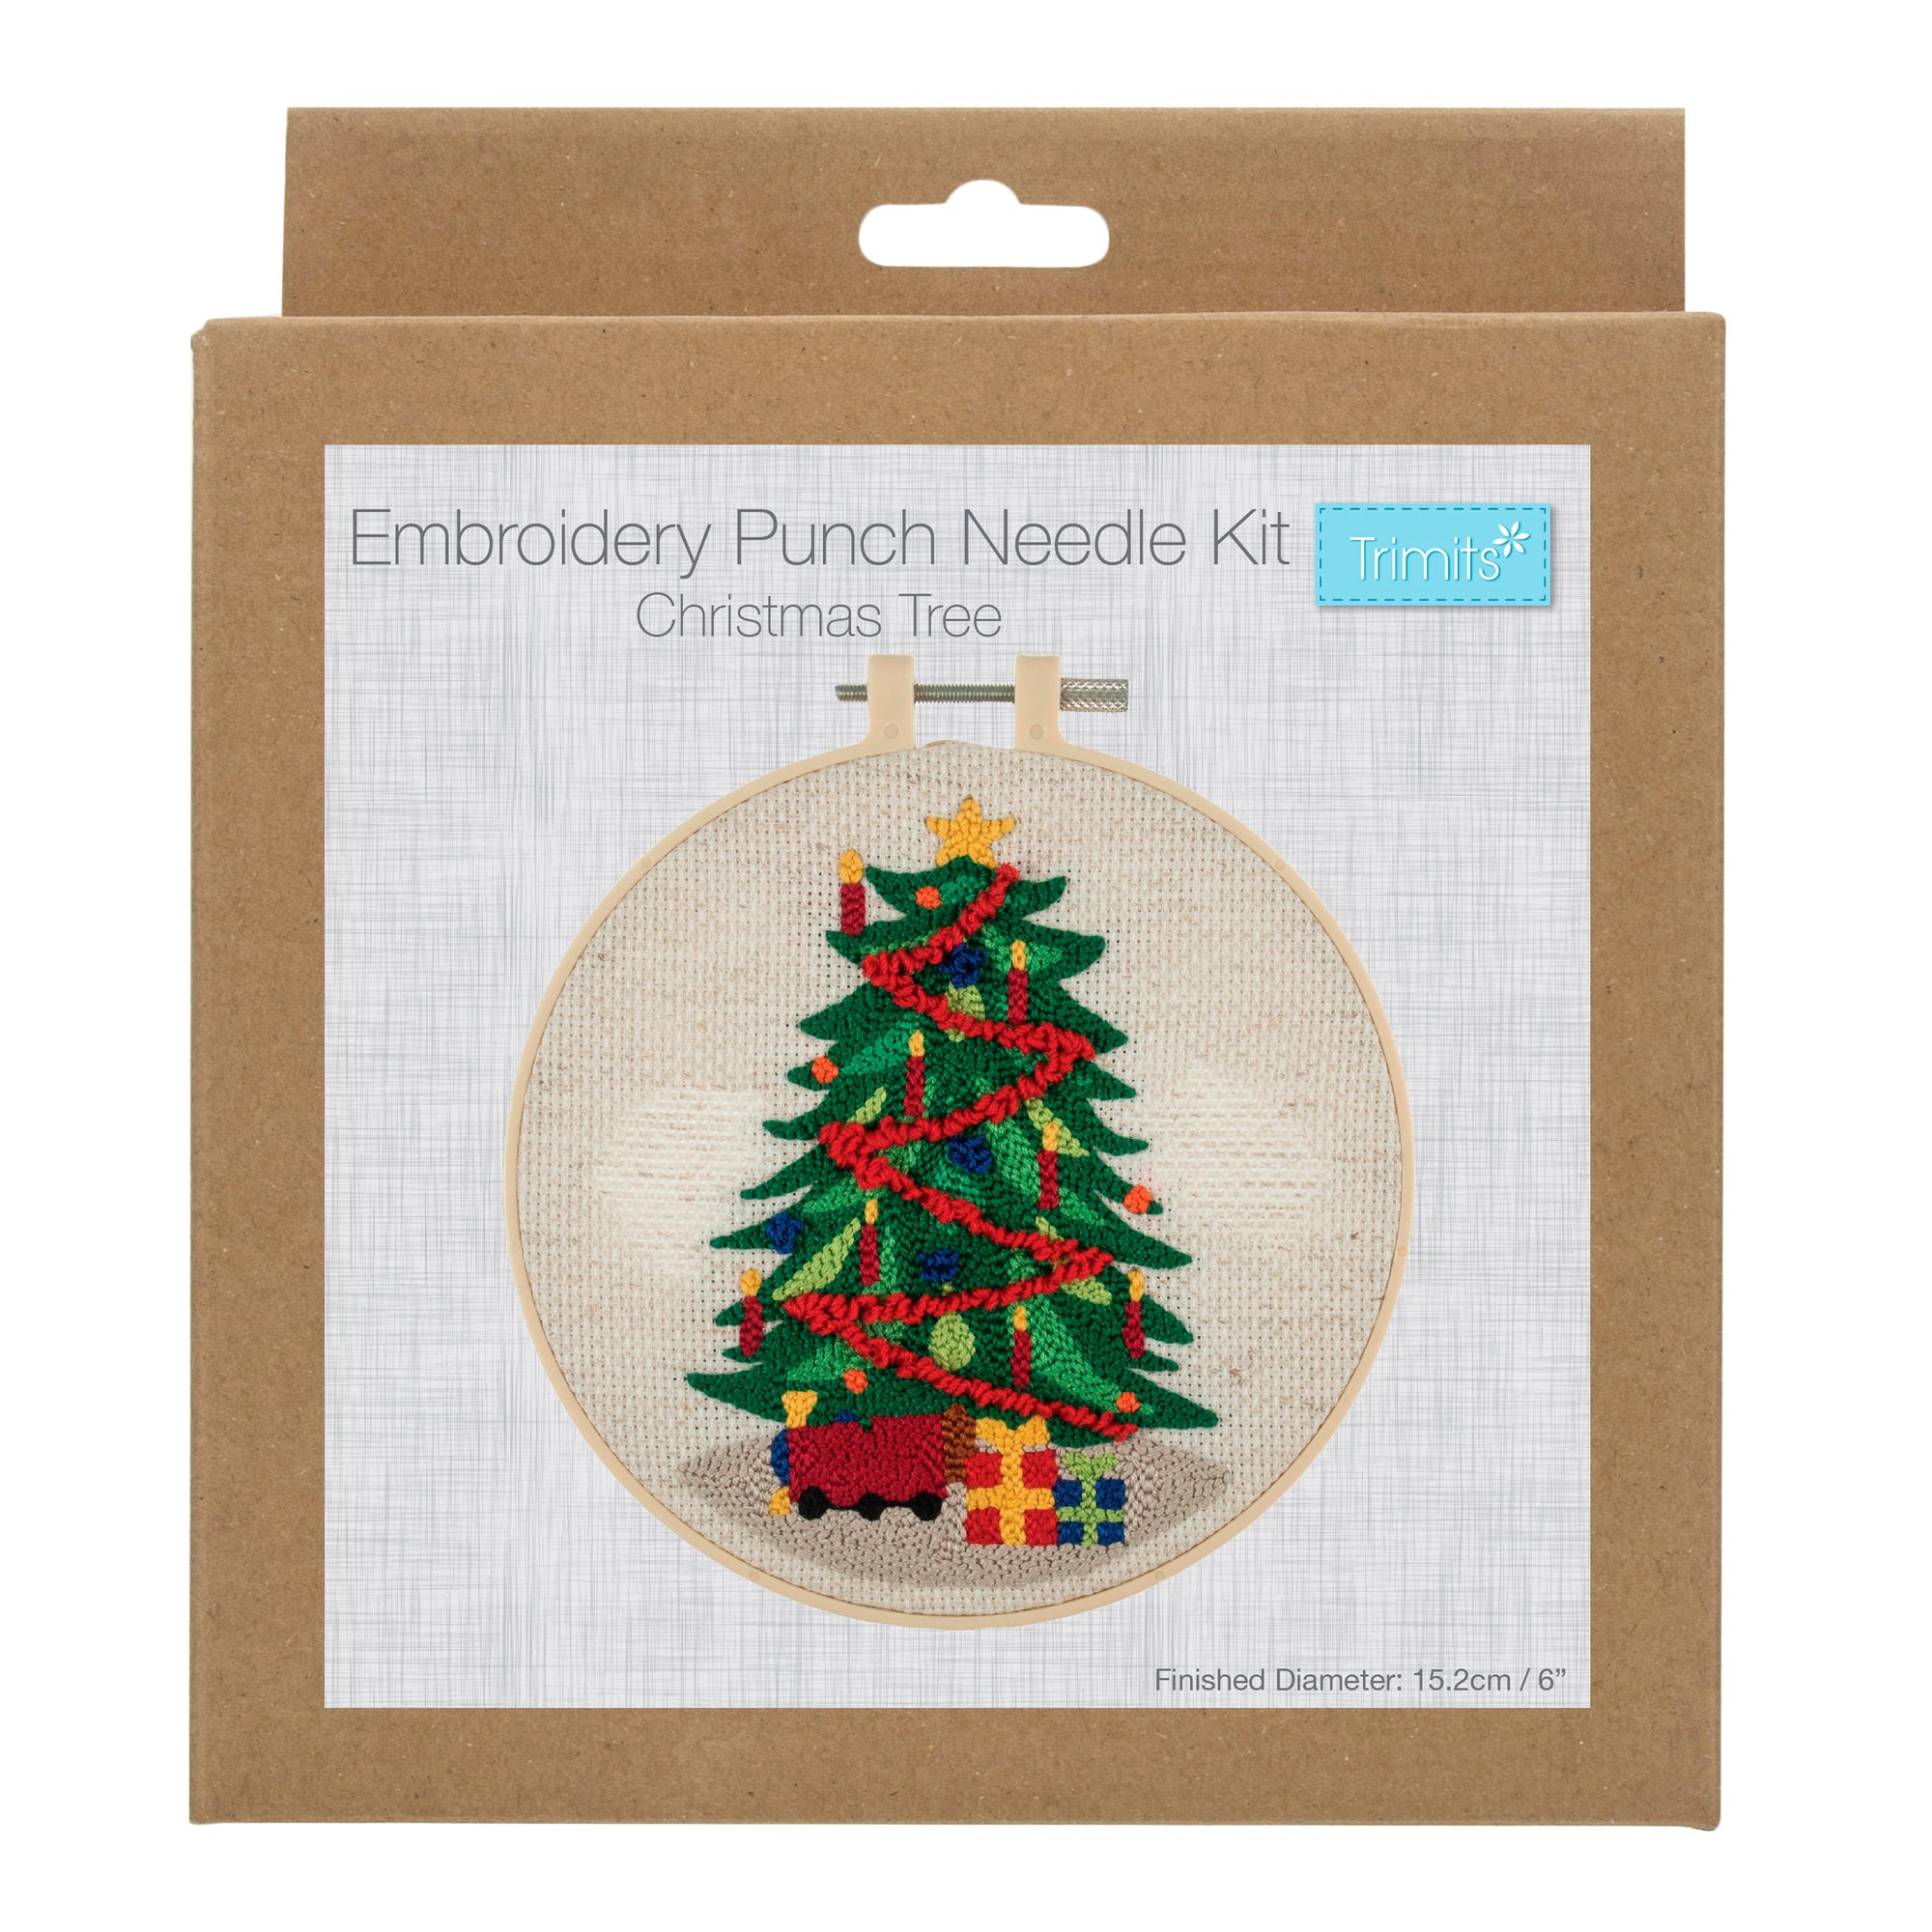 Embroidery Punch Needle Kit: Floss and Hoop - Christmas Tree